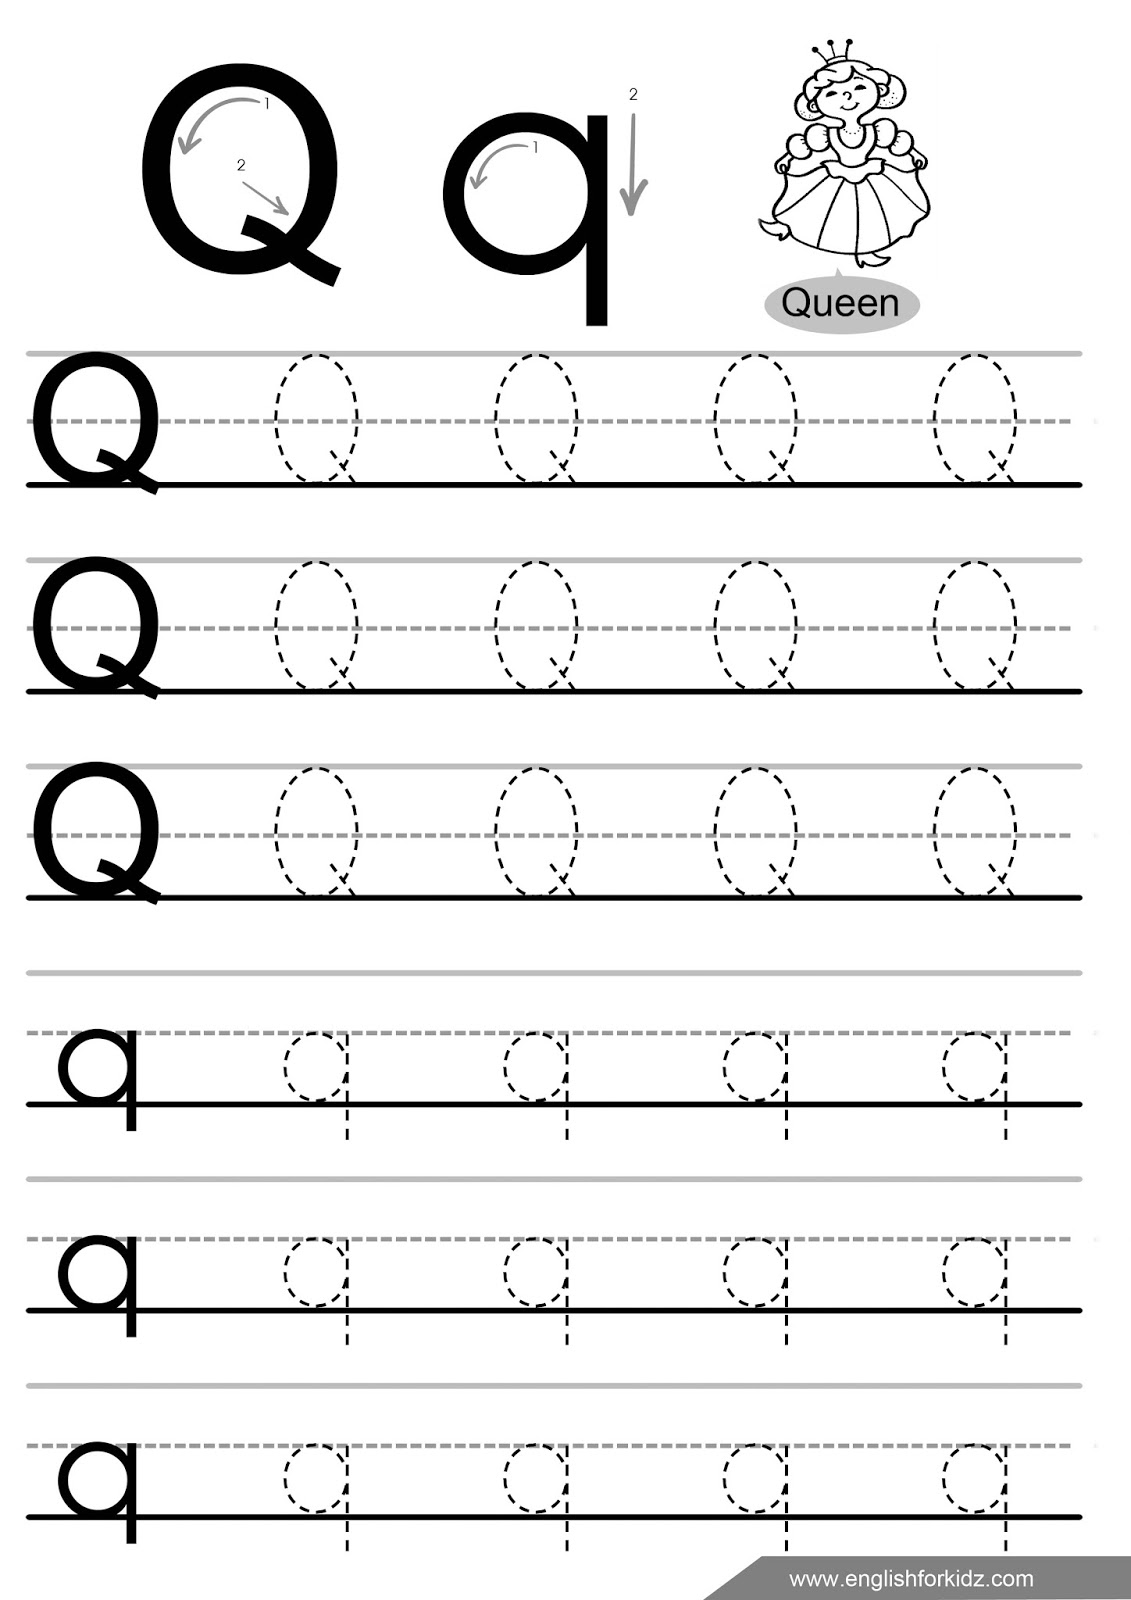 English for kids step by step letter q worksheets flash cards coloring pages